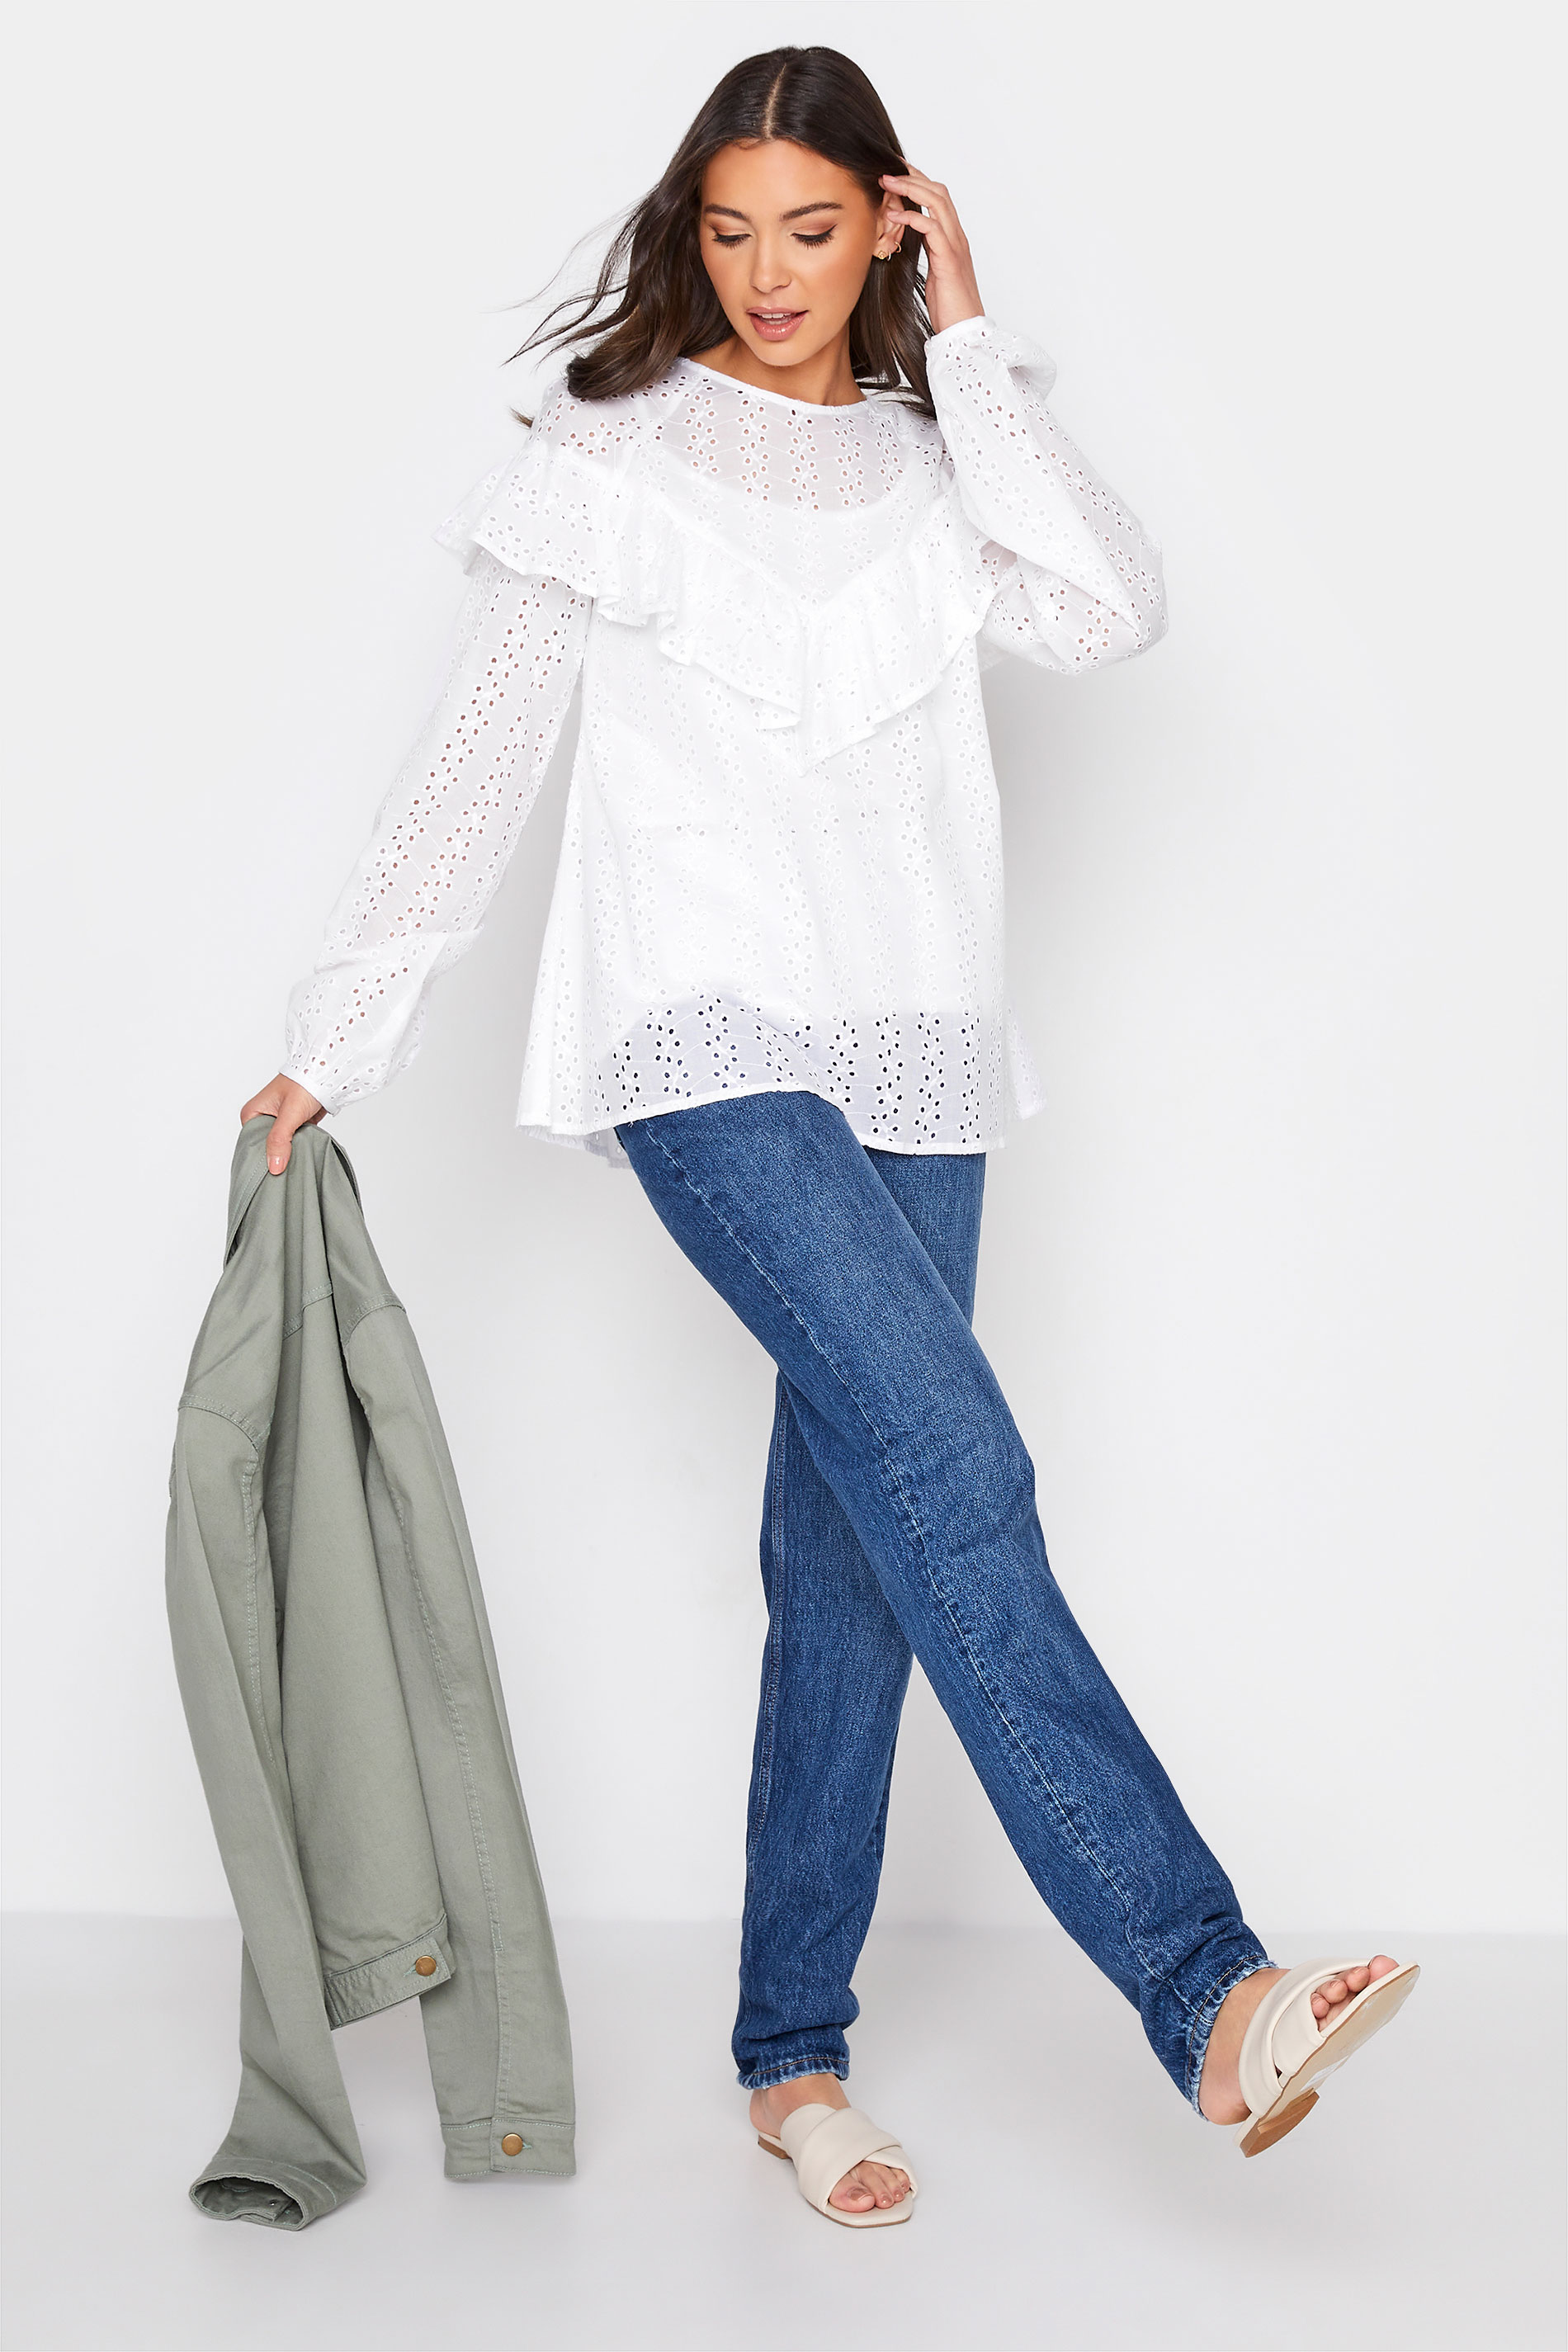 Tall Women's LTS White Broderie Anglaise Ruffle Top | Long Tall Sally 2